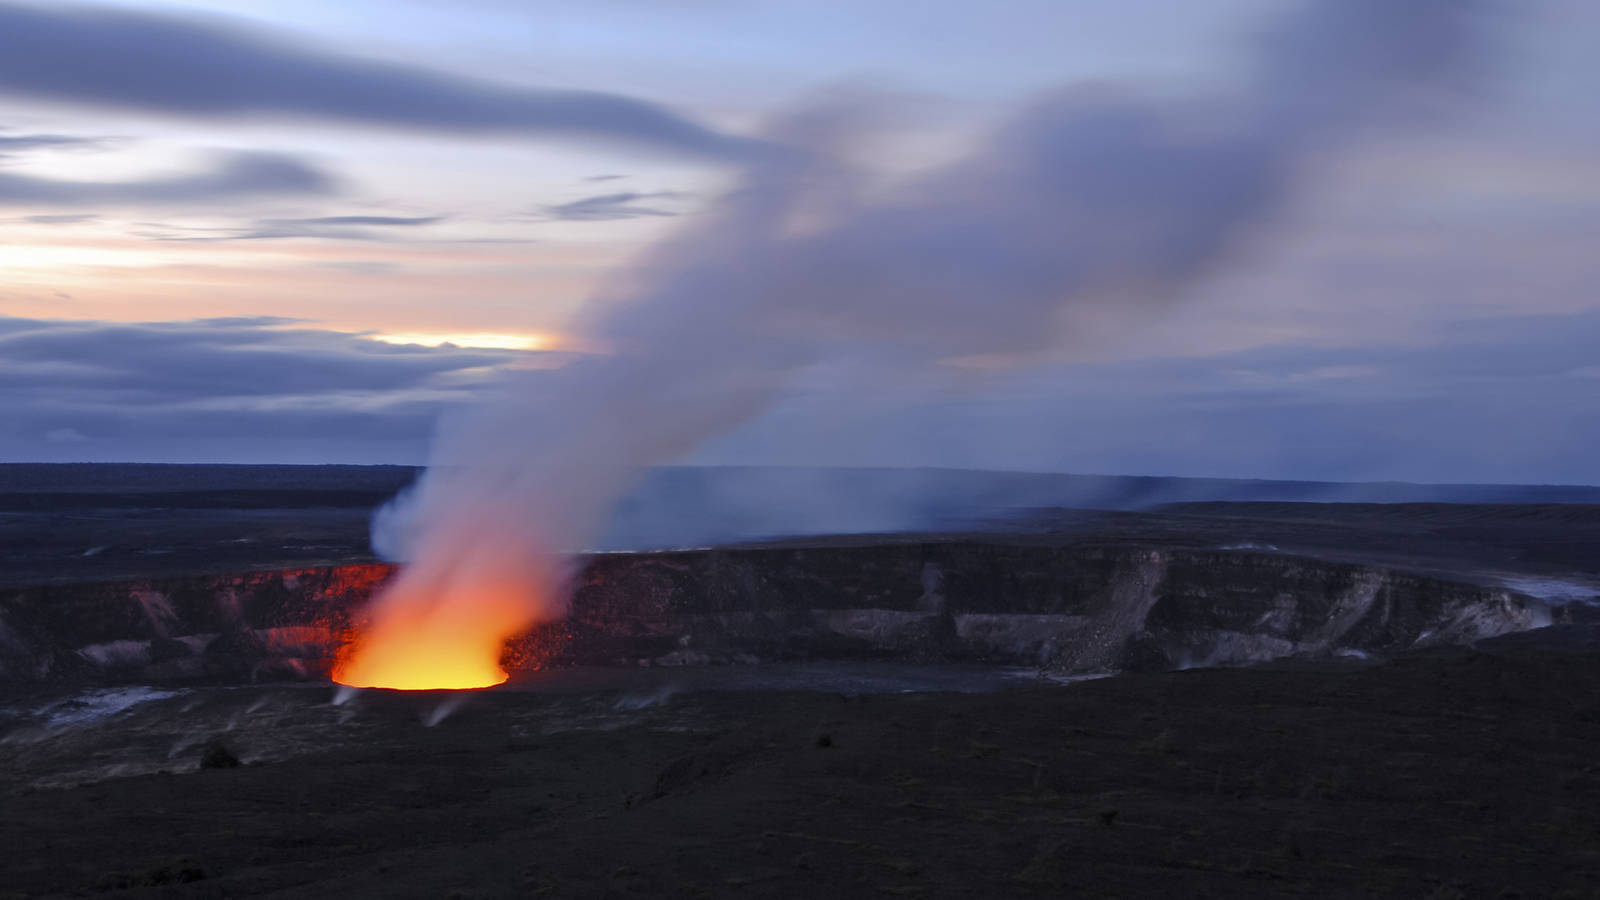 The new glow at Hawaii Volcanoes National Park